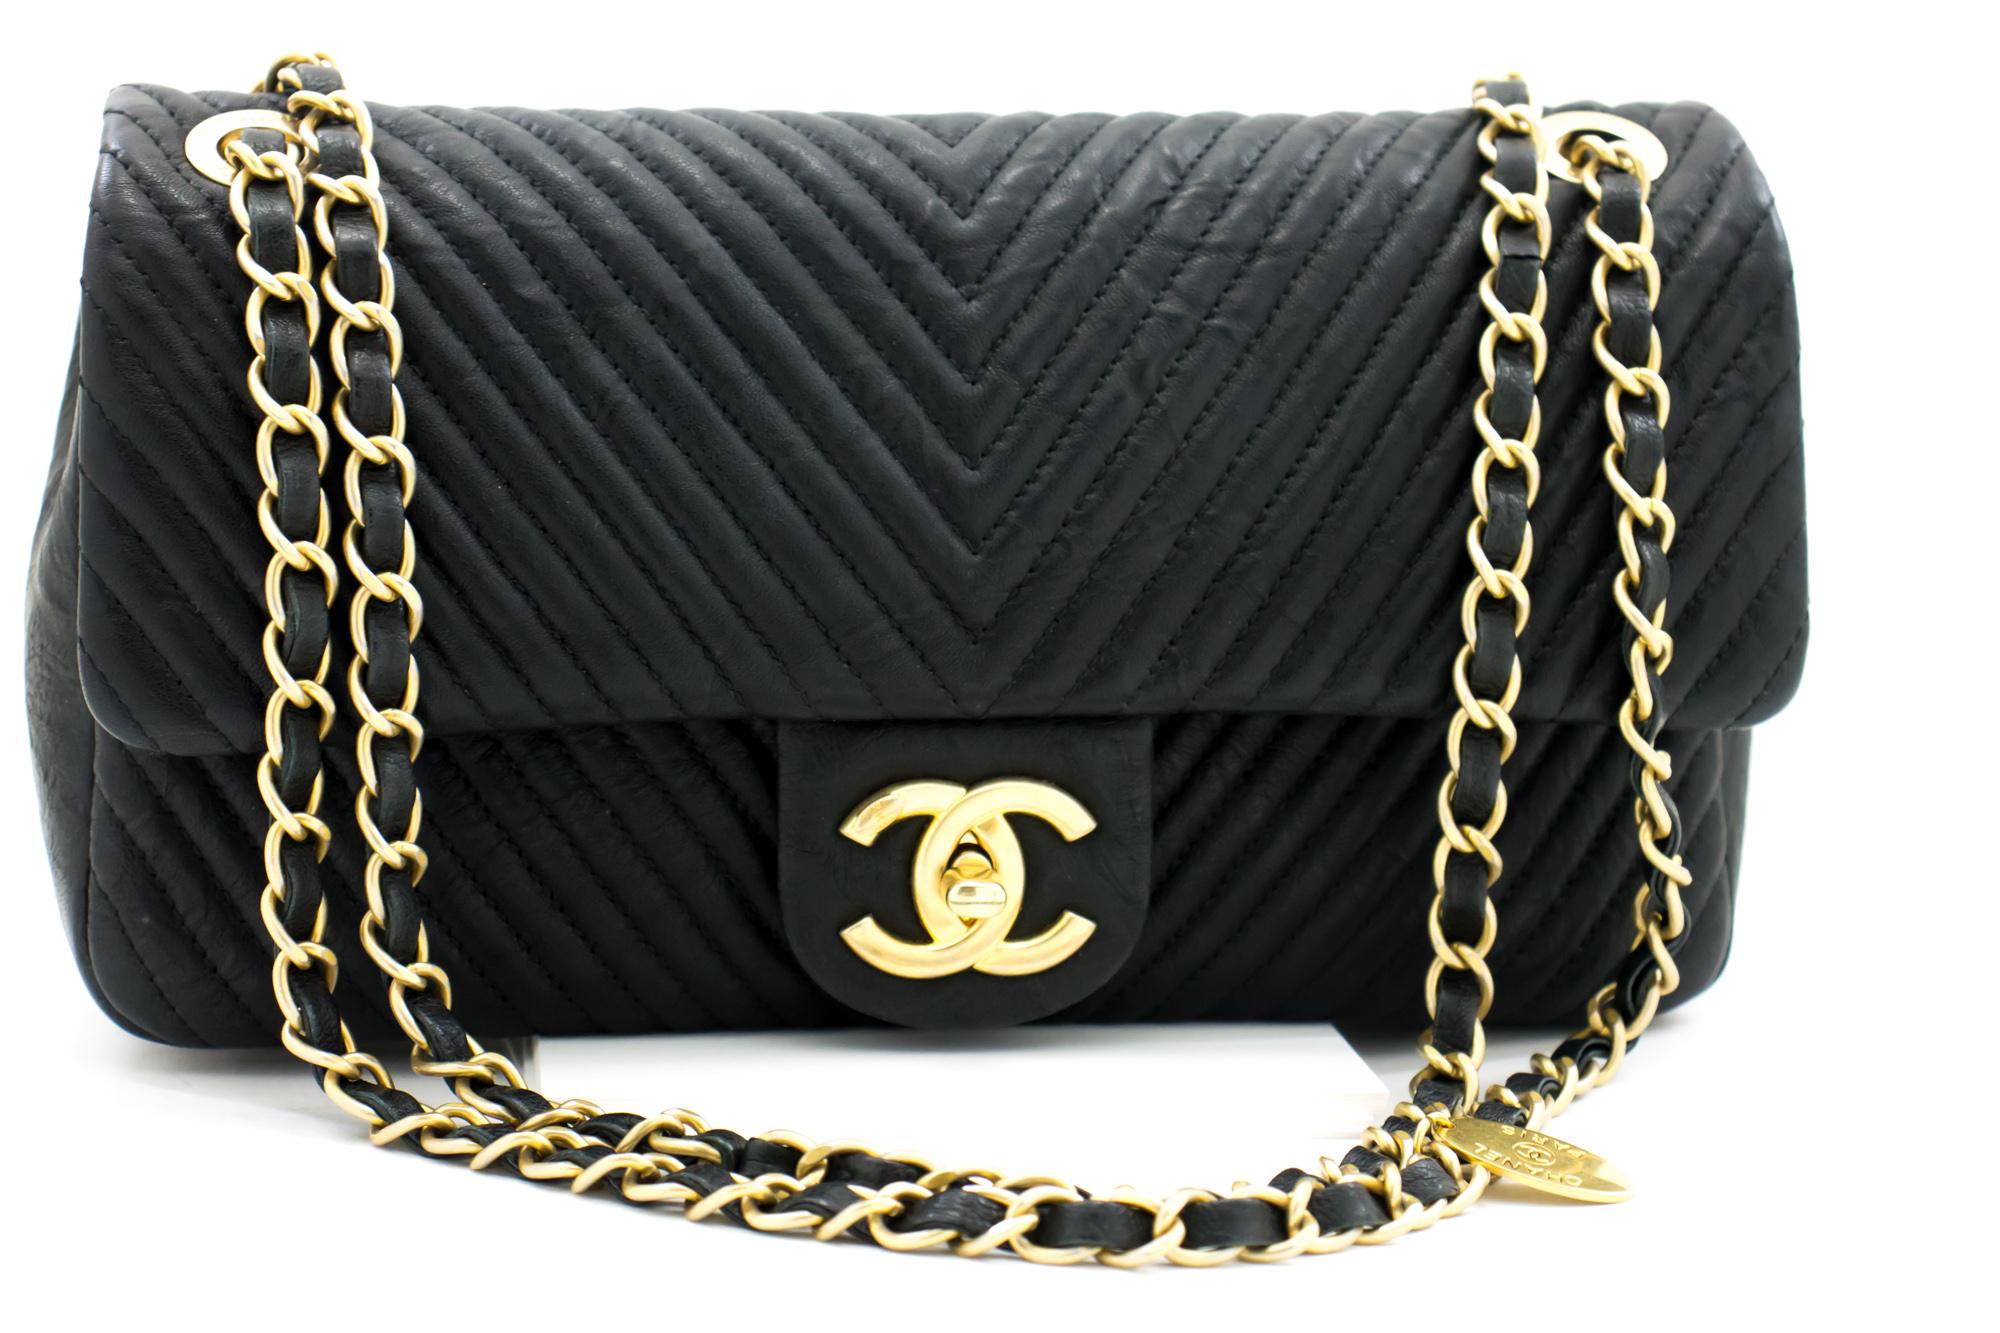 An authentic Chanel 2015 Chevron V-Stitch Leather Flap Chain Shoulder Bag. The color is Black. The outside material is Leather. The pattern is Solid. This item is Contemporary. The year of manufacture would be 2014.
Conditions & Ratings
Outside